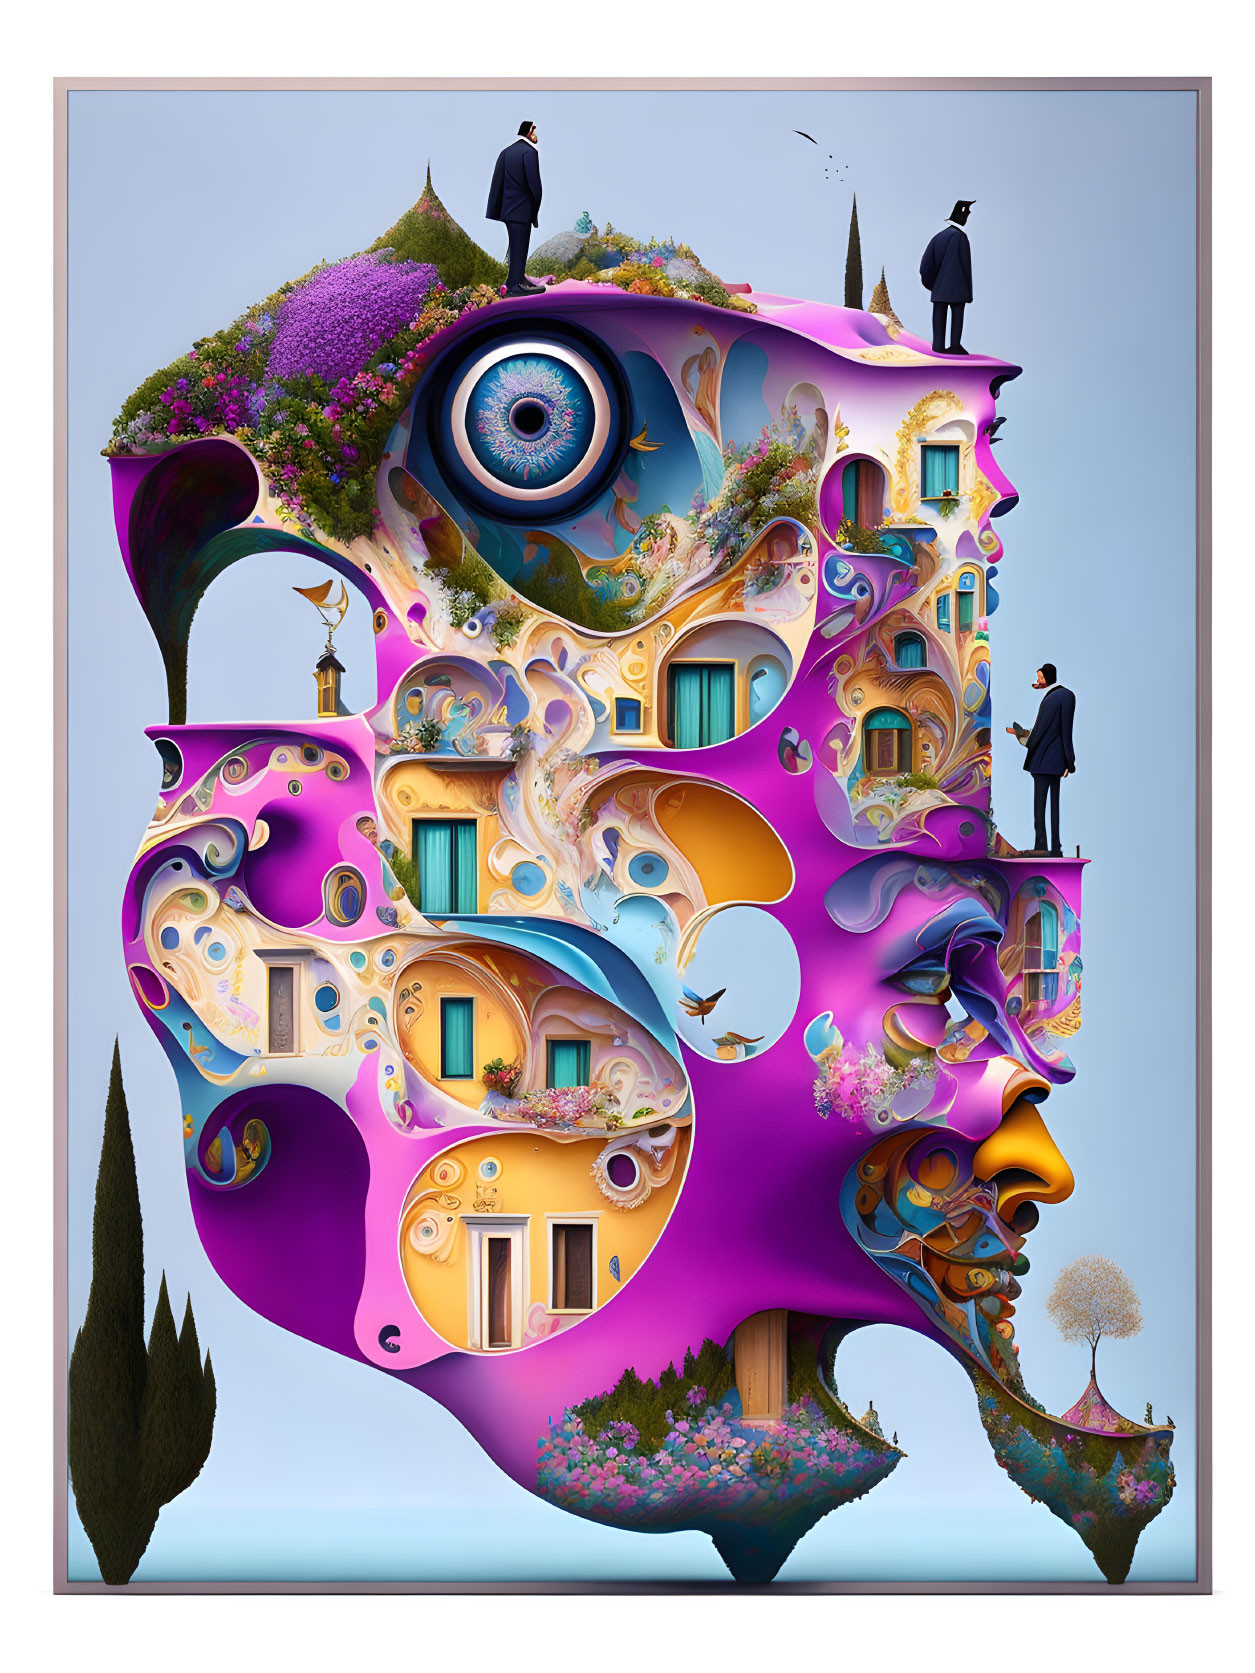 Colorful surreal artwork: Multi-faced structure with eyes, balconies, whimsical shapes, figures in